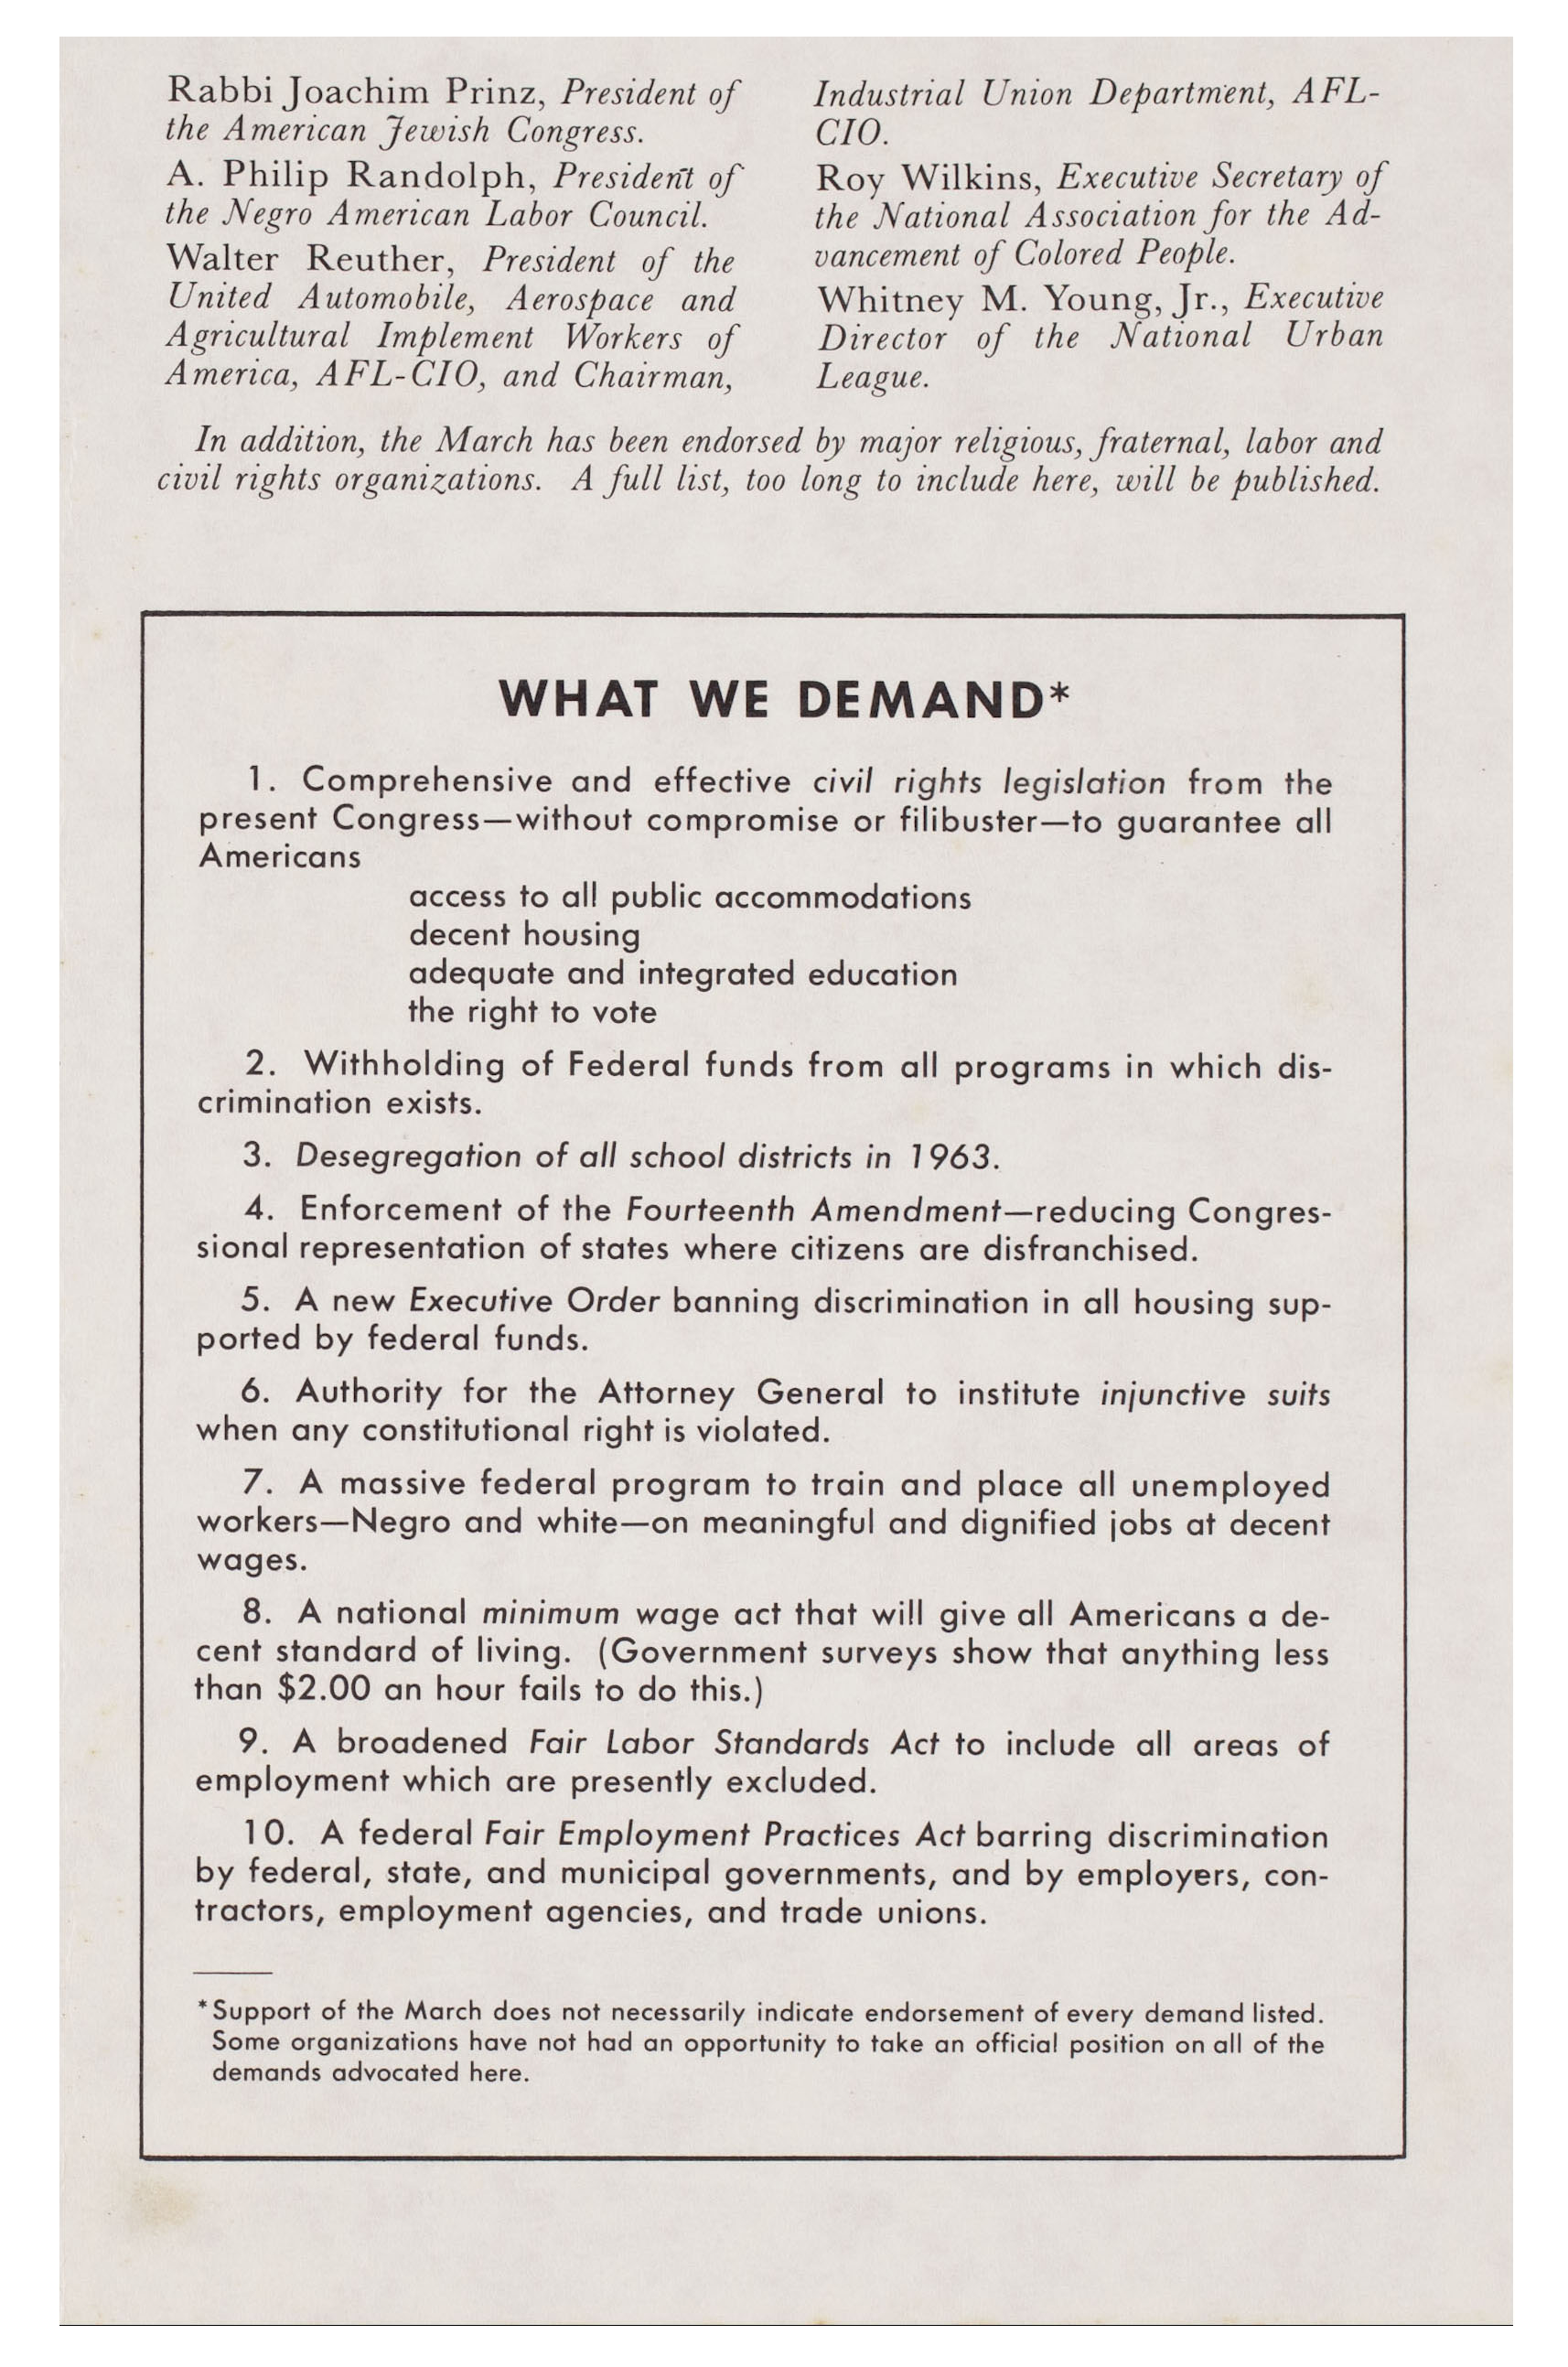 Statement by the heads of 10 organizations calling for discipline in connectiong with the Washington March August 1963, with 10 demands. 